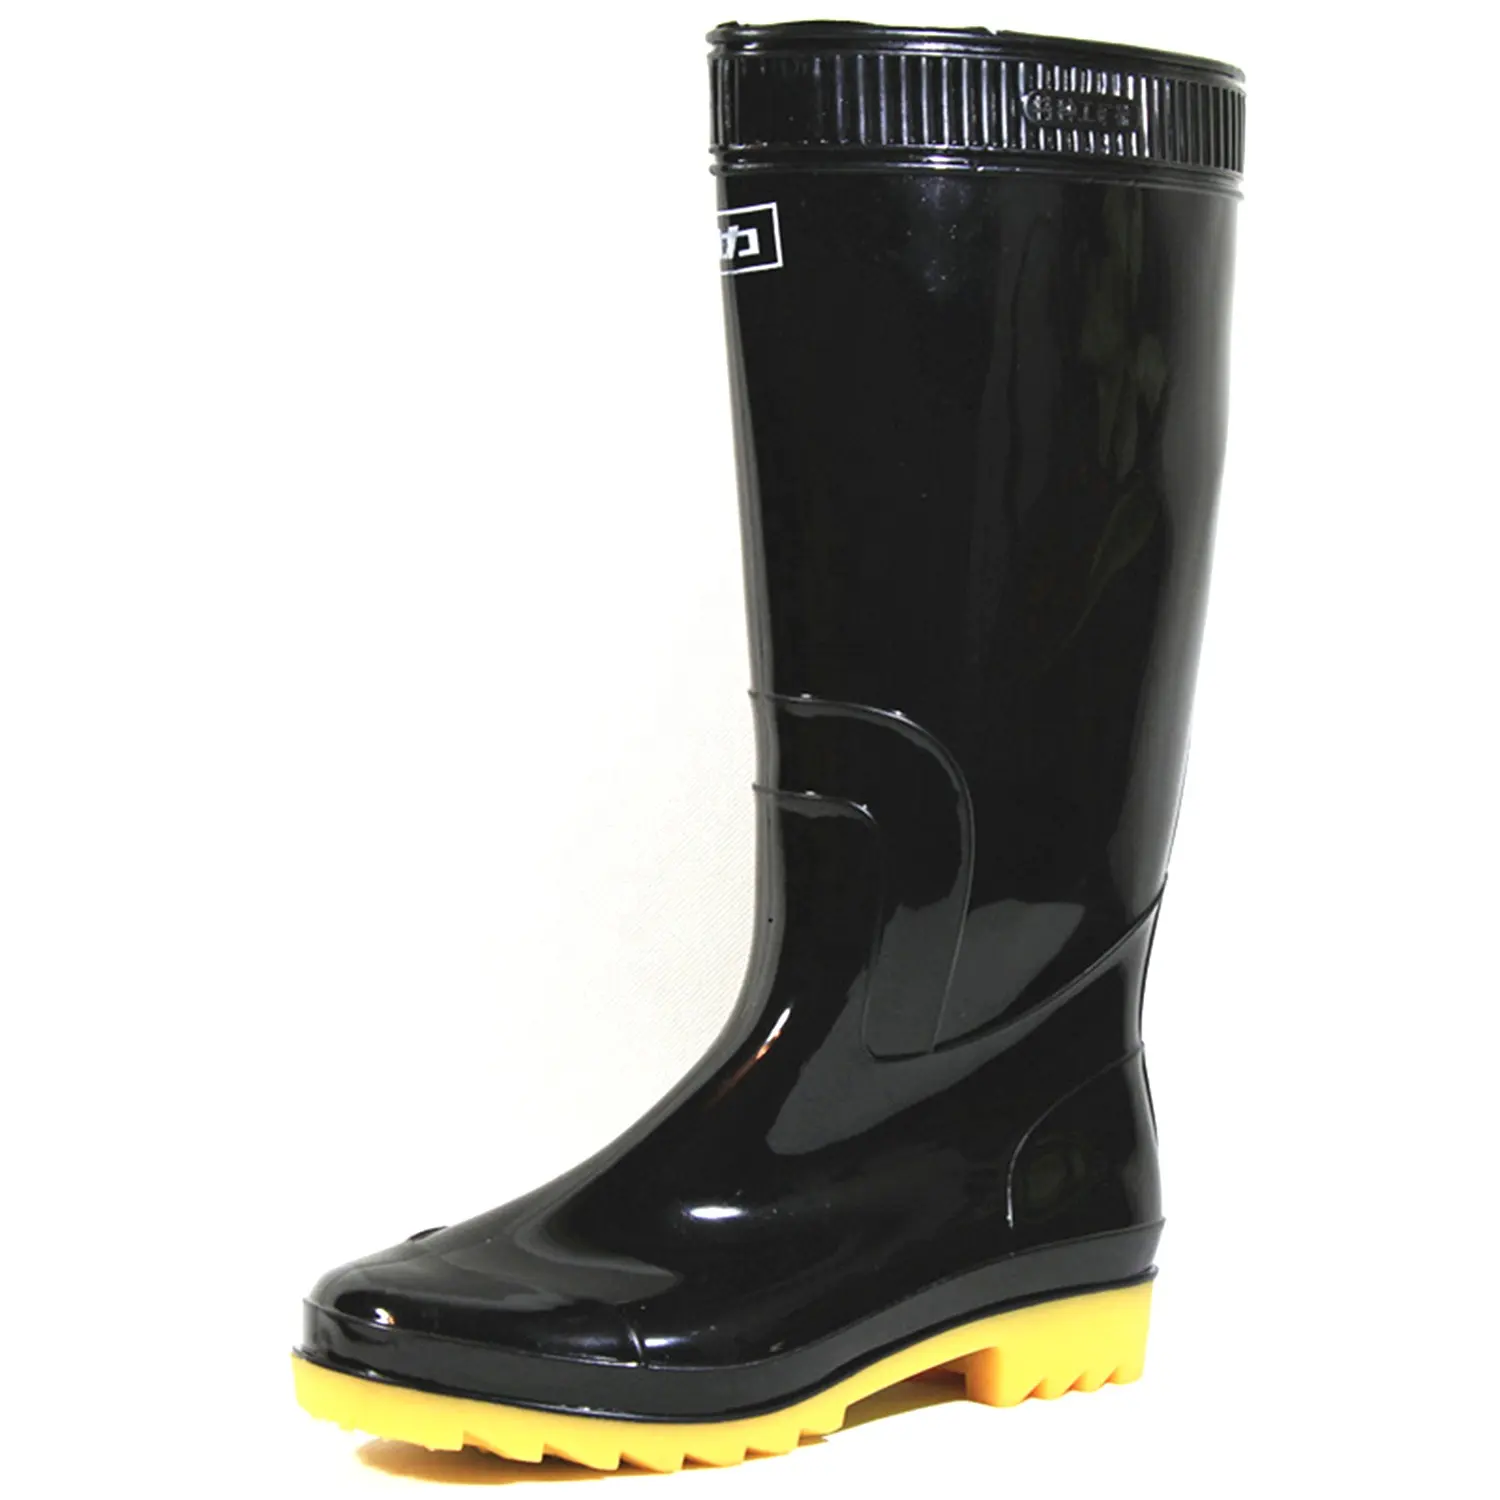 Knee length color custom printed high mining wholesale PVC waterproof rubber shoes rain boots for men